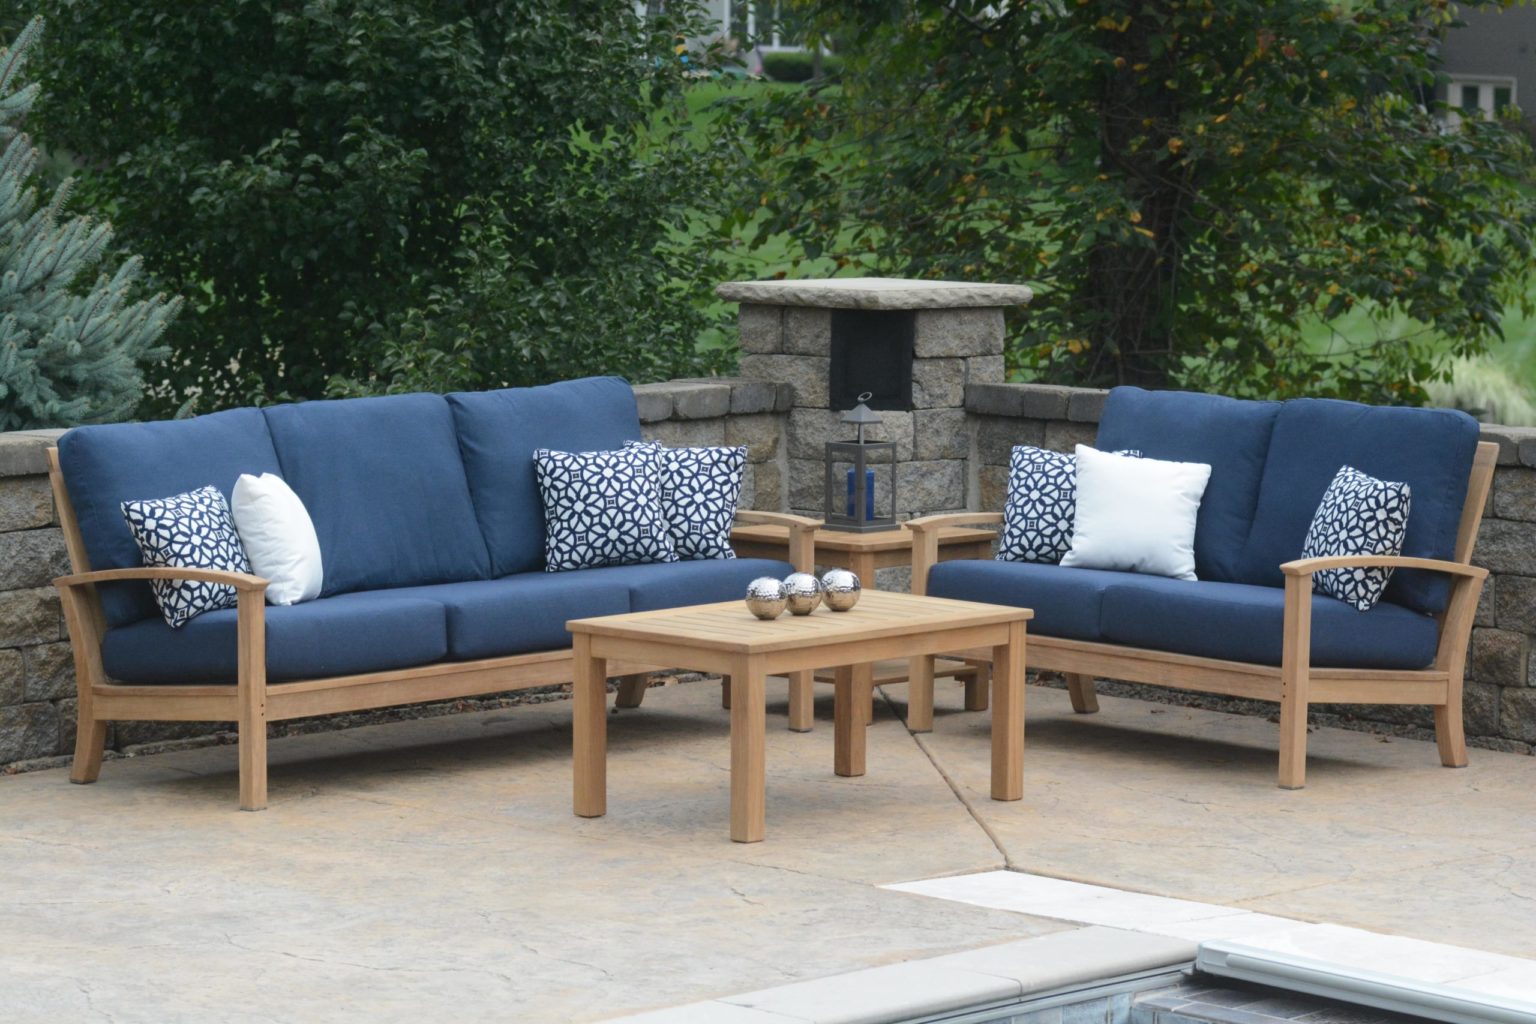 A St. Lucia outdoor patio furniture set including a two and three-seat sofa with navy cushions around a small table in the middle, all placed poolside